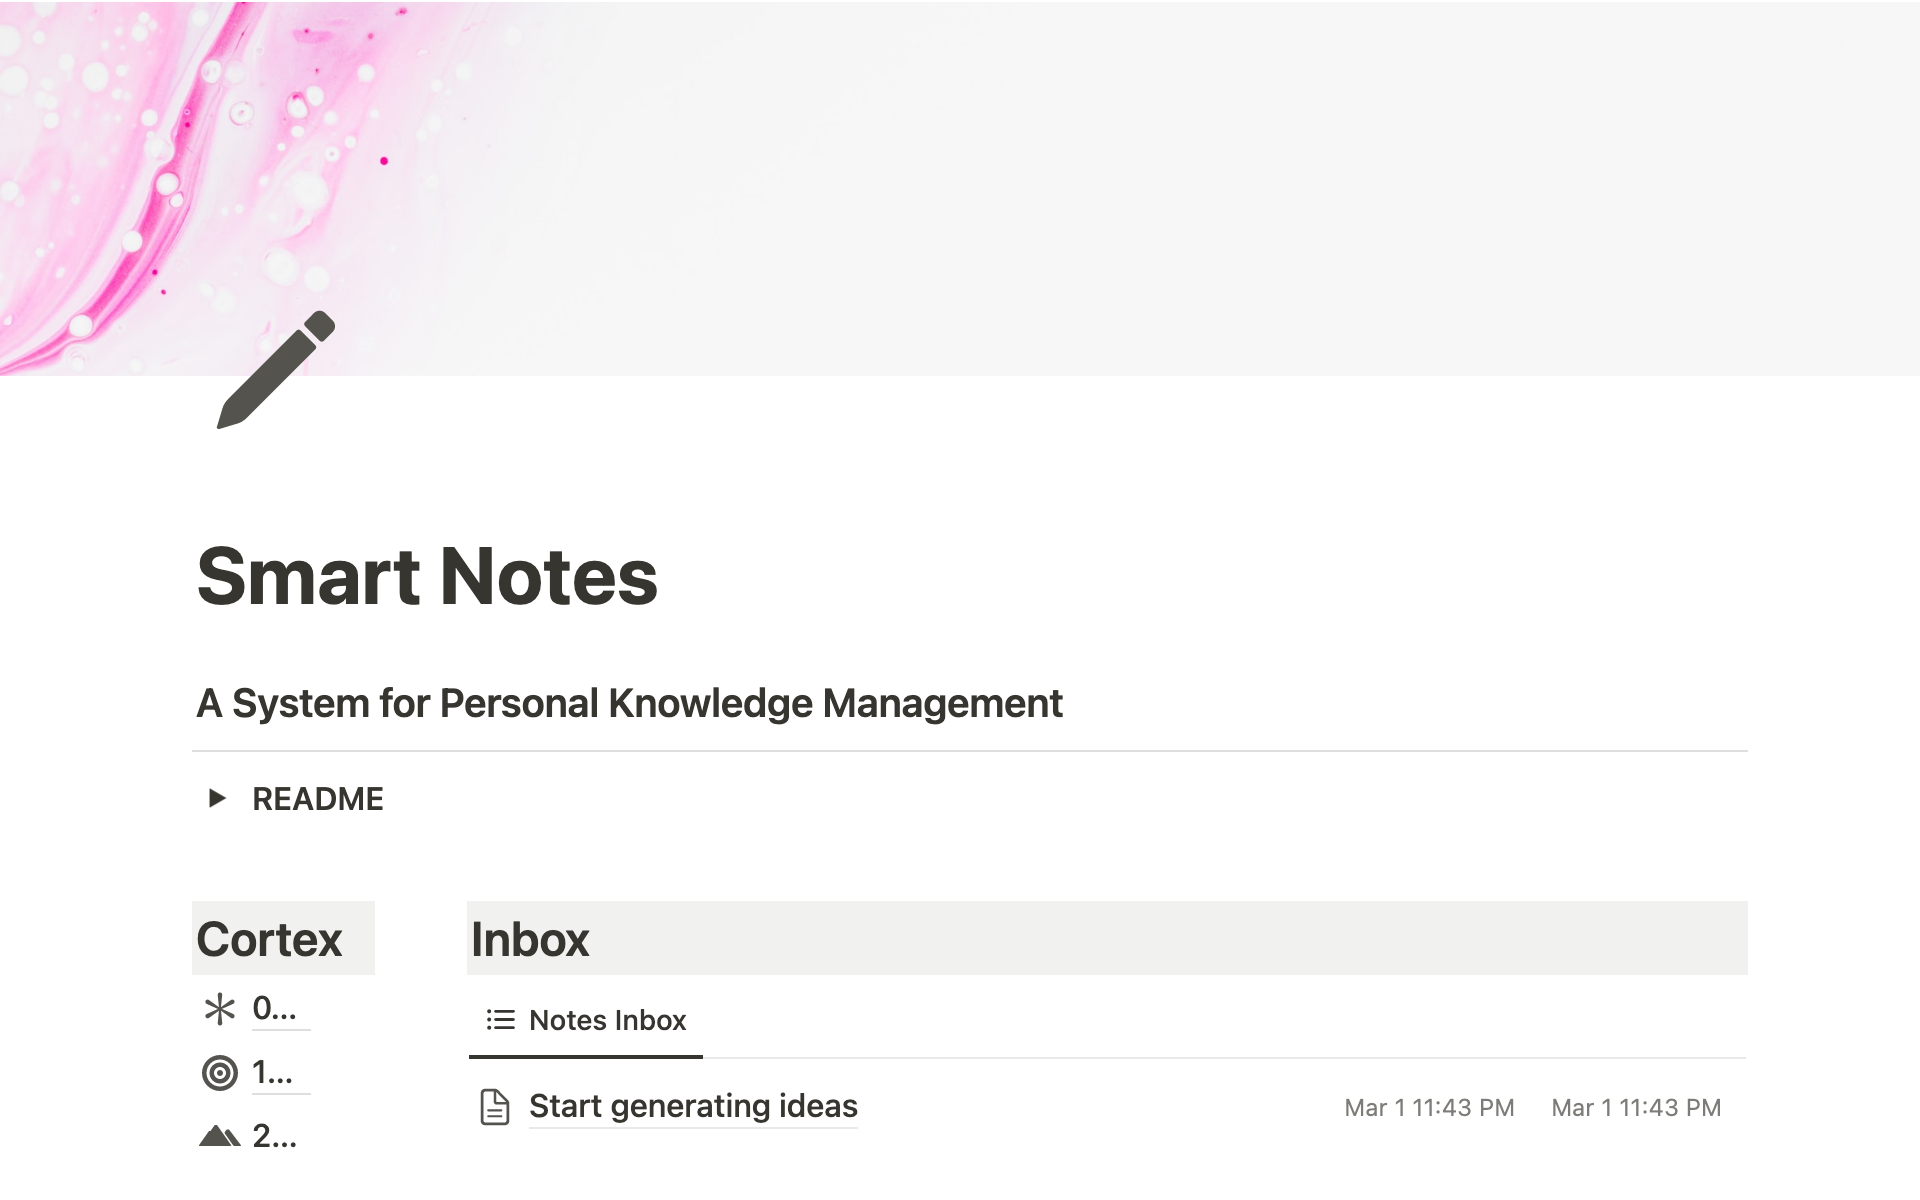 The template is a system for smart note taking and personal knowledge management